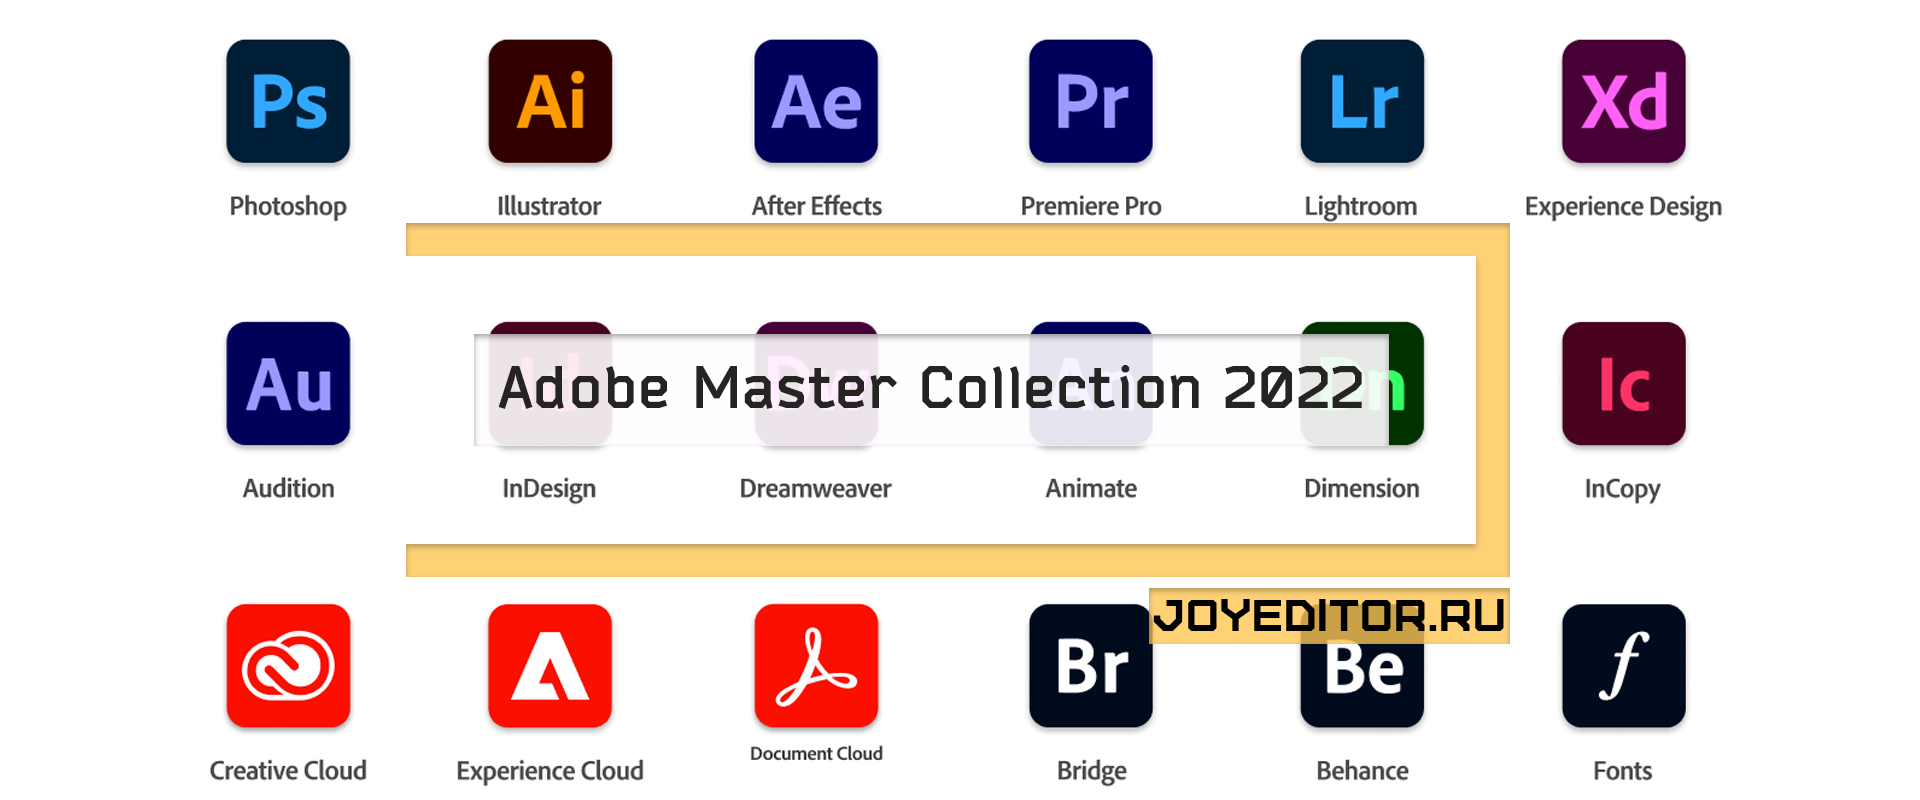 Adobe Master collection 2022. Адоб мастер коллекшн 2022. Adobe Master collection cc 2020. Adobe Master collection 2022 иконка. Adobe collection 2023